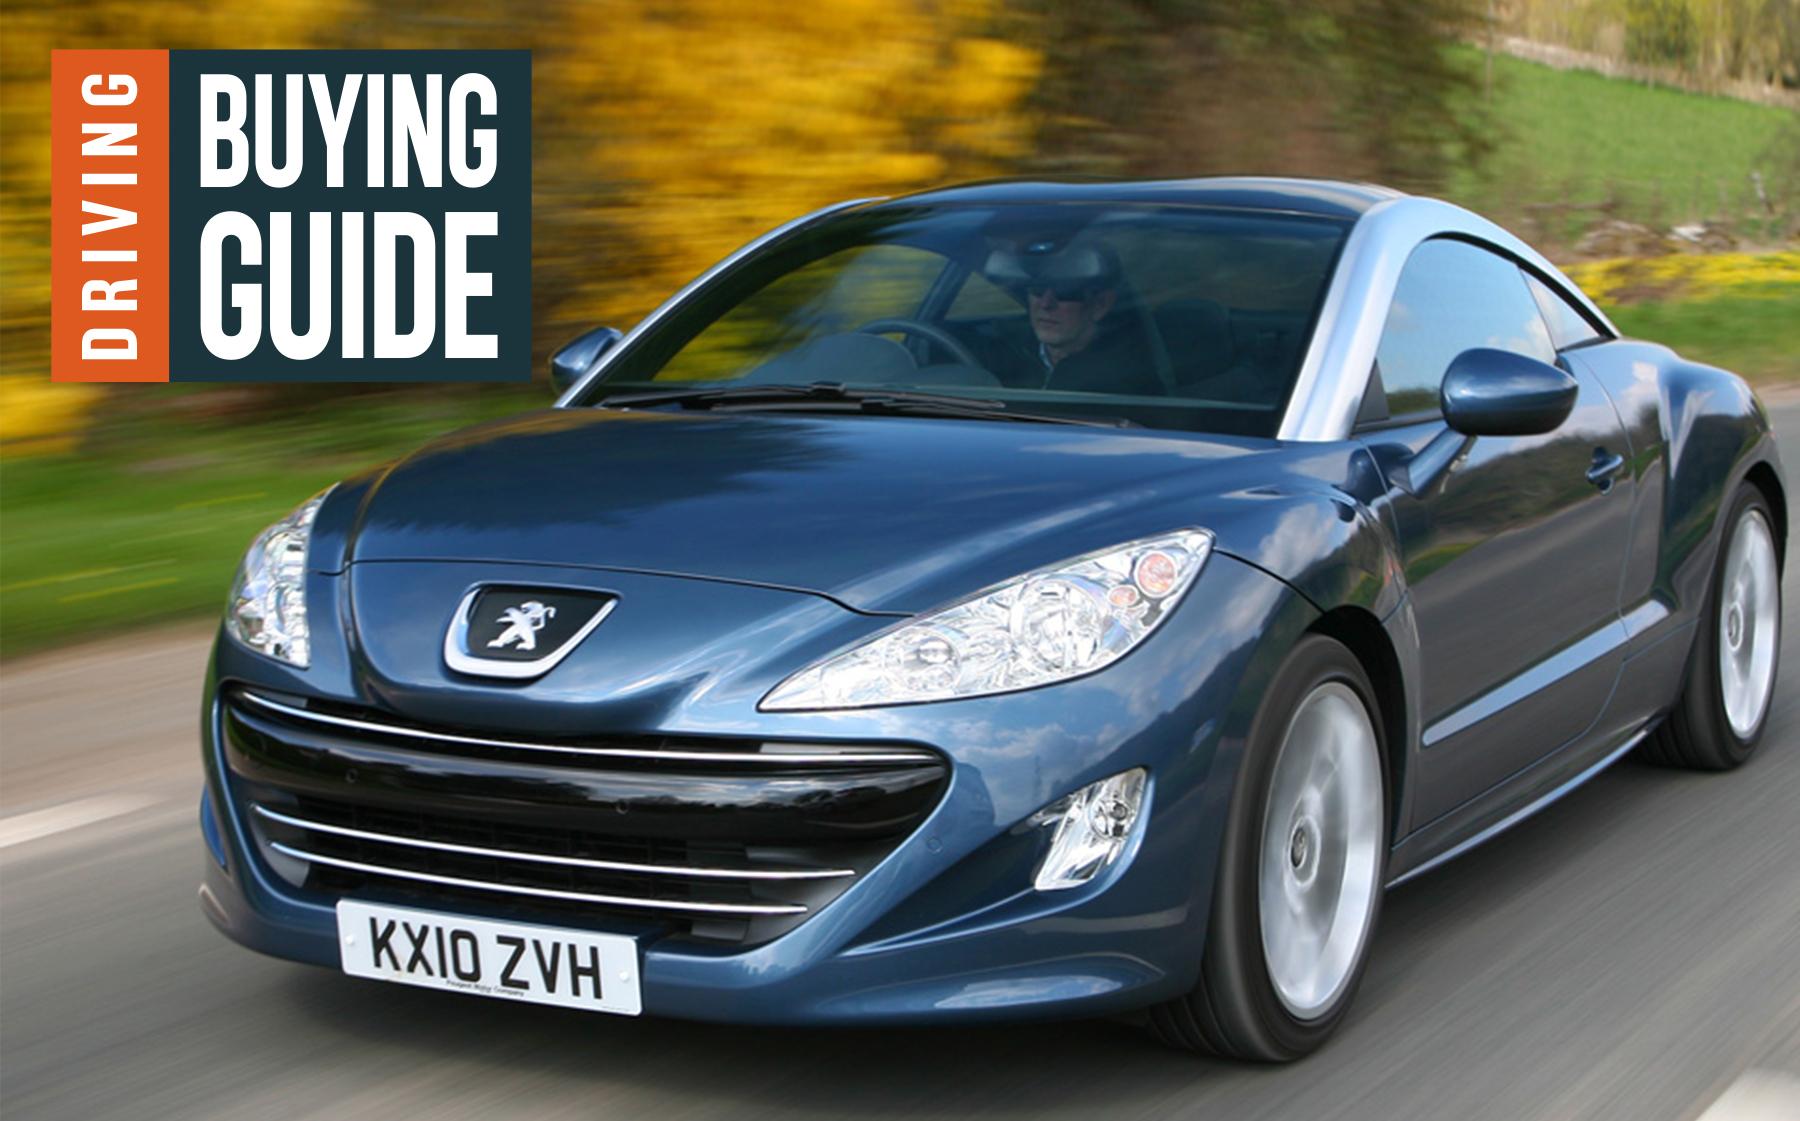 used car buying guide - the best cars for £11,000